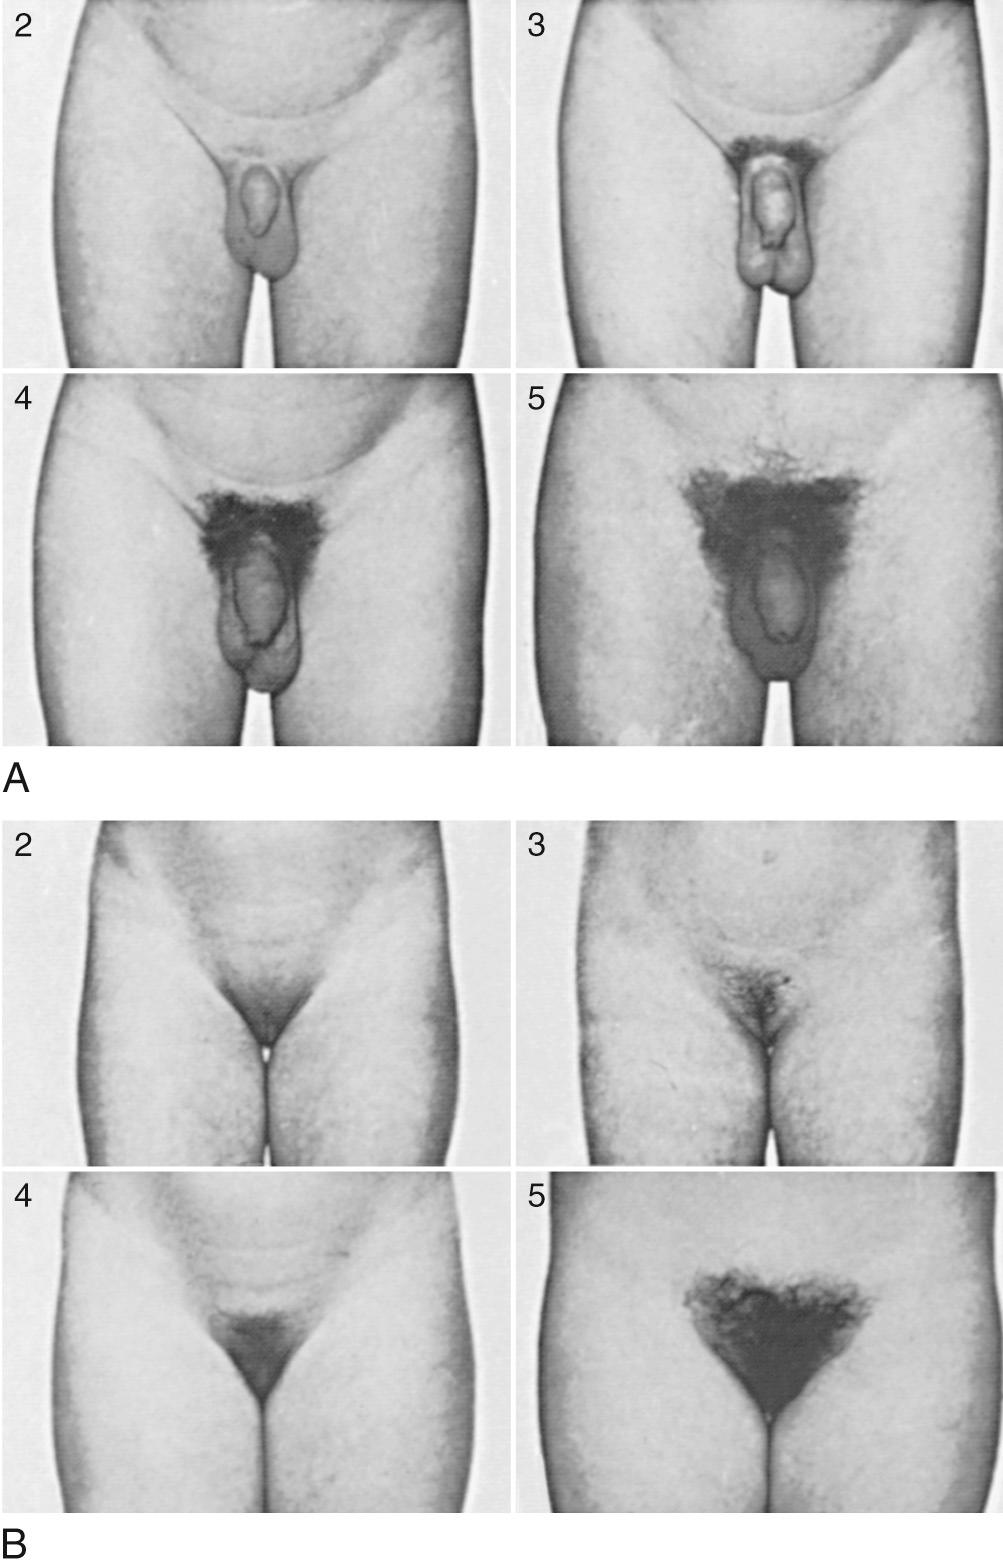 Fig. 132.1, Sexual maturity ratings (2-5) of pubic hair changes in adolescent males ( A ) and females ( B ) (see Tables 132.2 and 132.3 ).